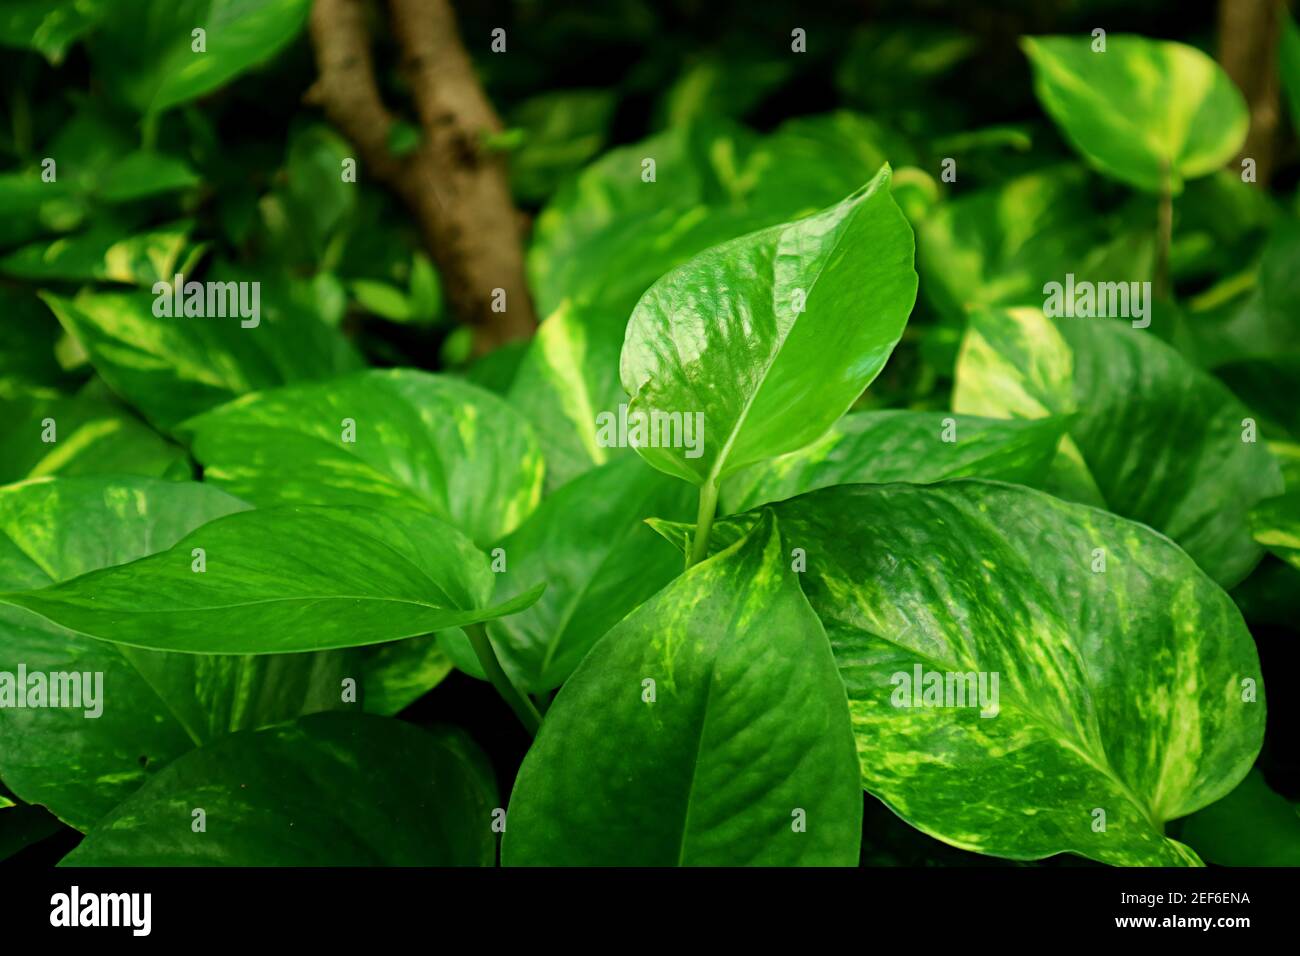 Closeup Vibrant Green Devil's Ivy Plants Growing in the Garden Stock Photo